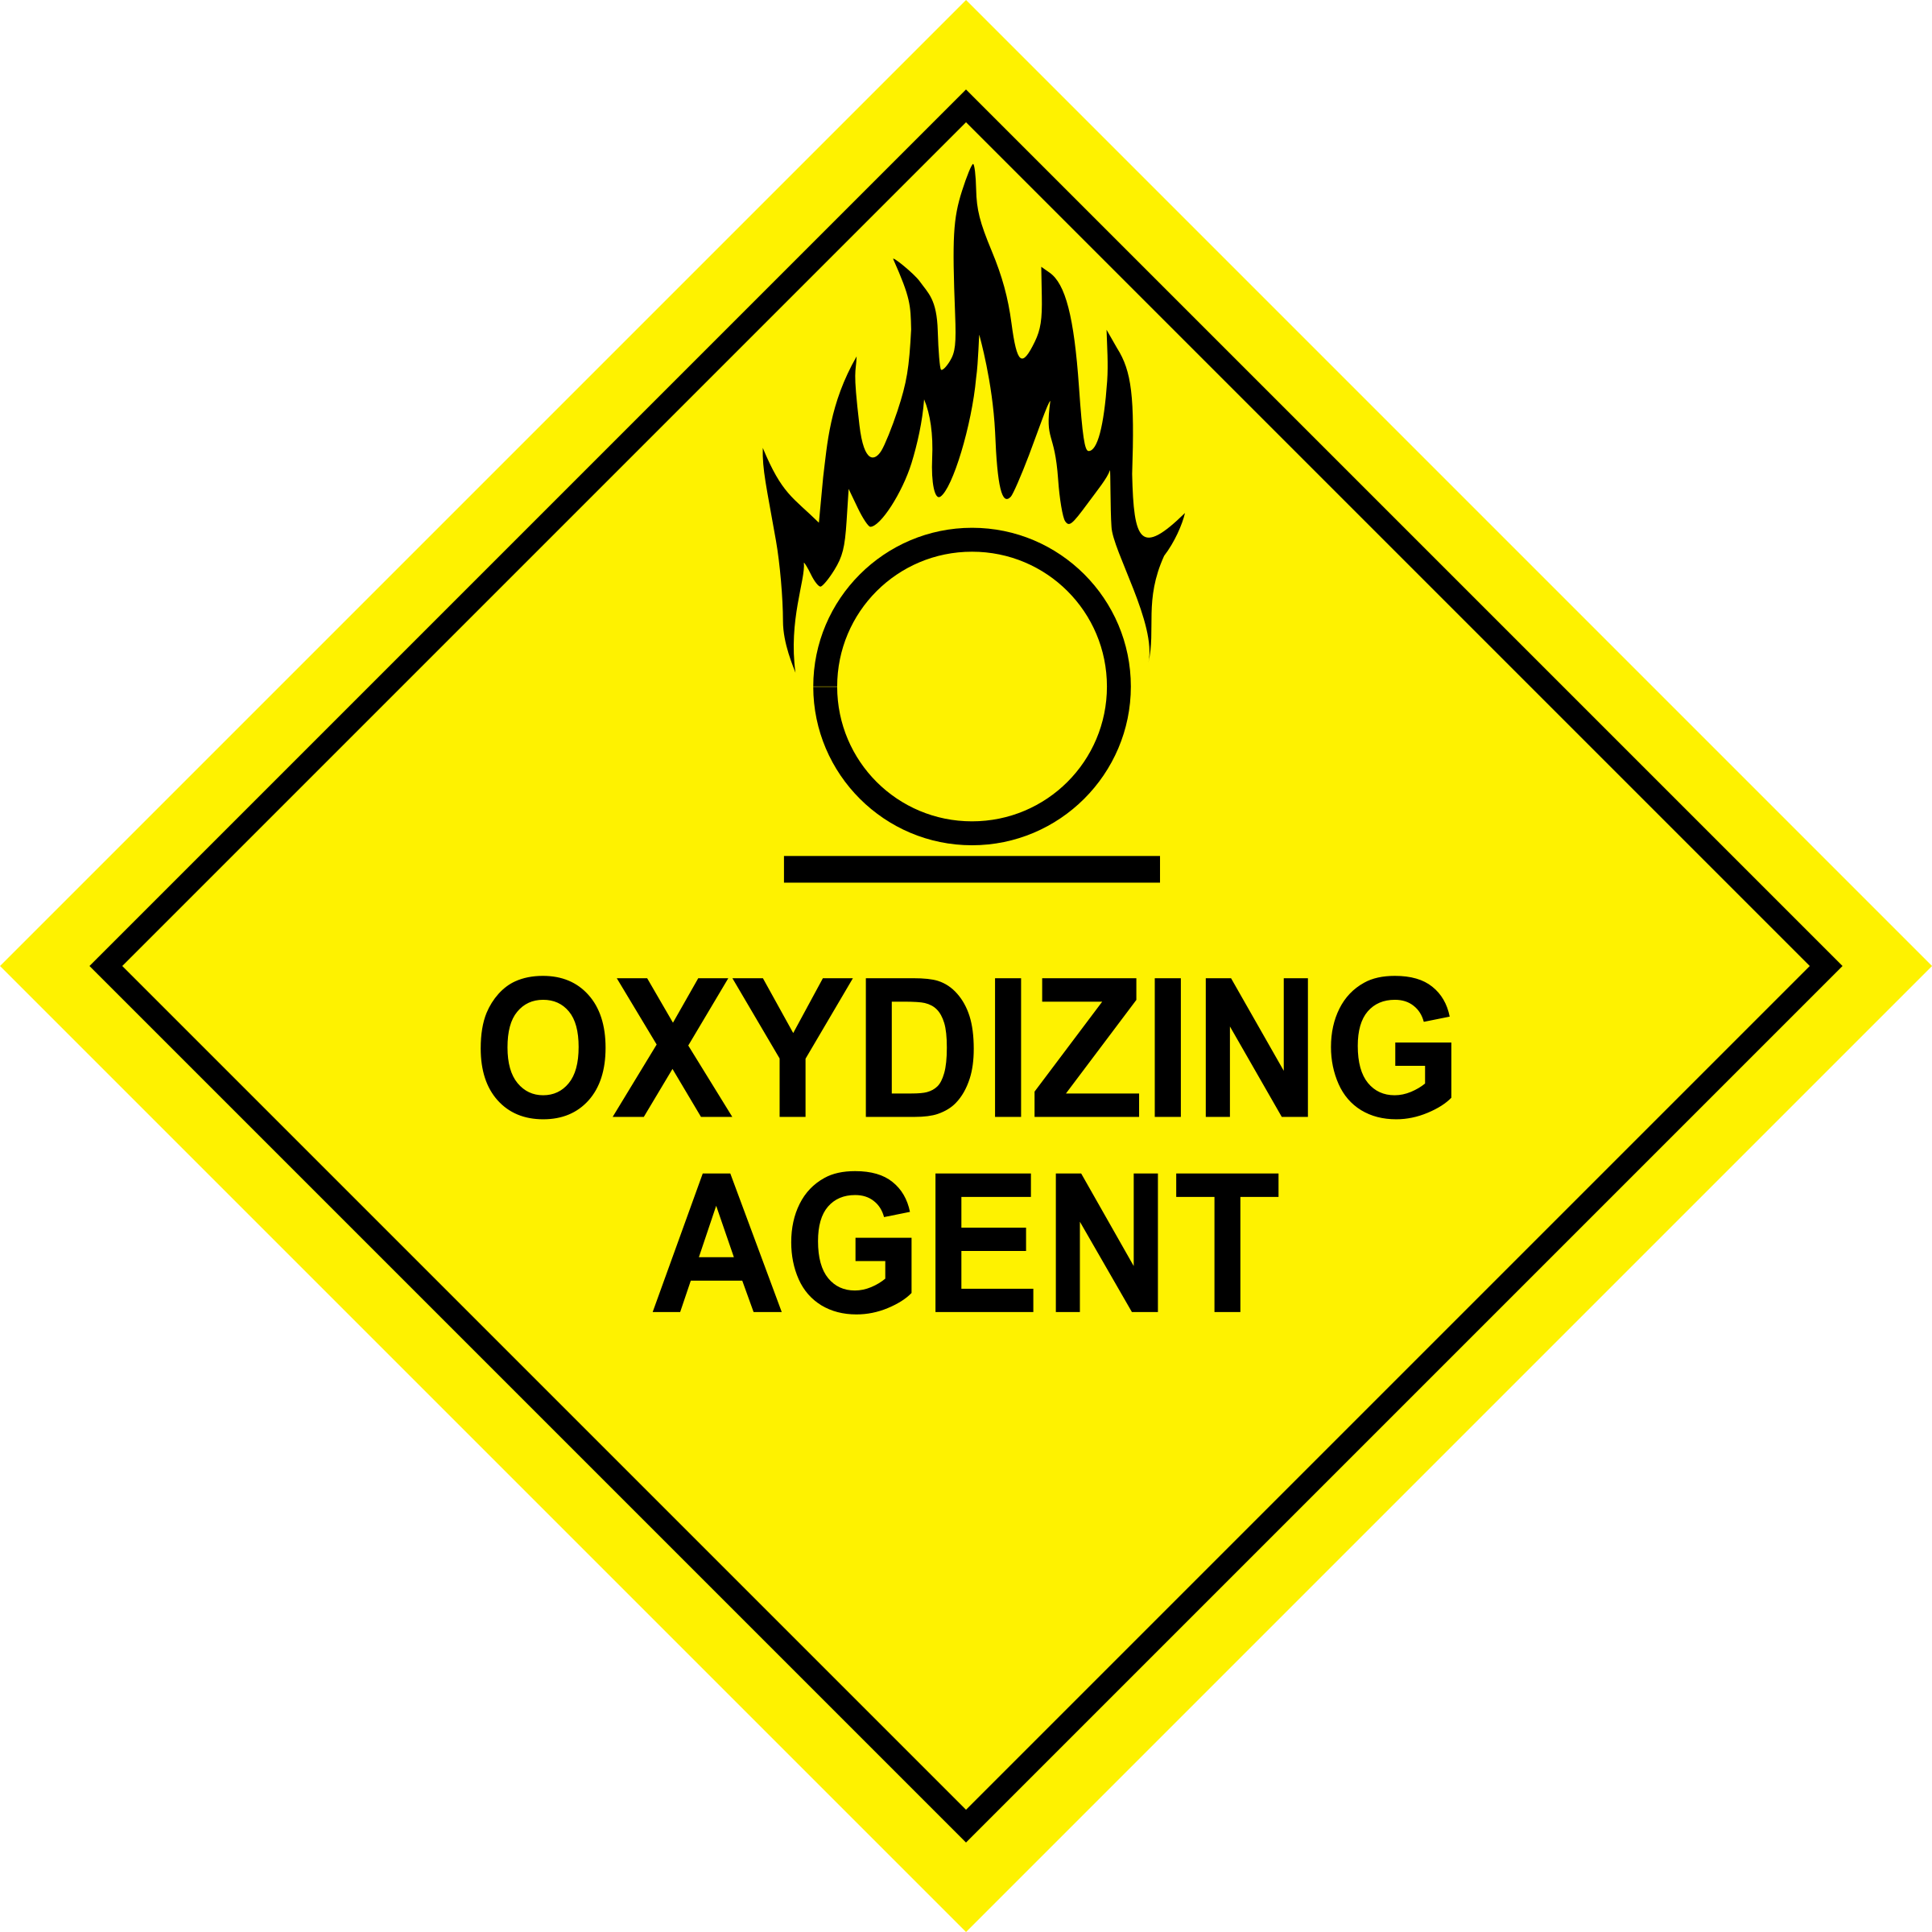 Definition Of Clipart In Microsoft - Hazardous Material Placards, Label - Oxidising Agent (2400x2400)